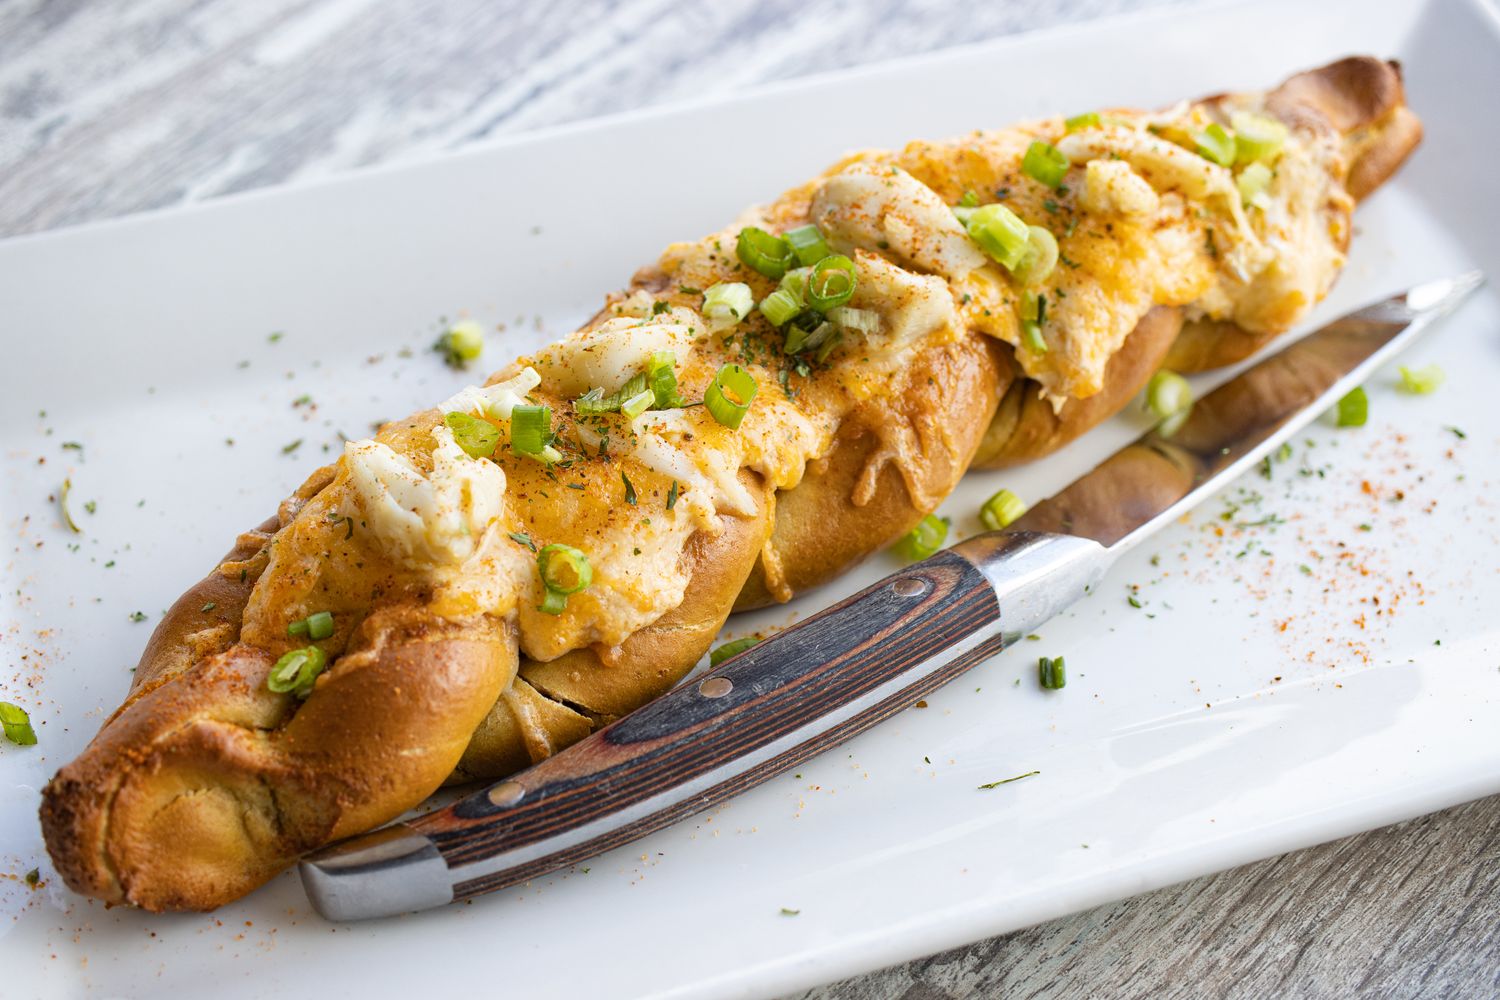 Dock House Crab Pretzel. Doughy braided pretzel topped with Creamy Crab Dip, cheddar cheese, scallions and a touch of Old Bay.